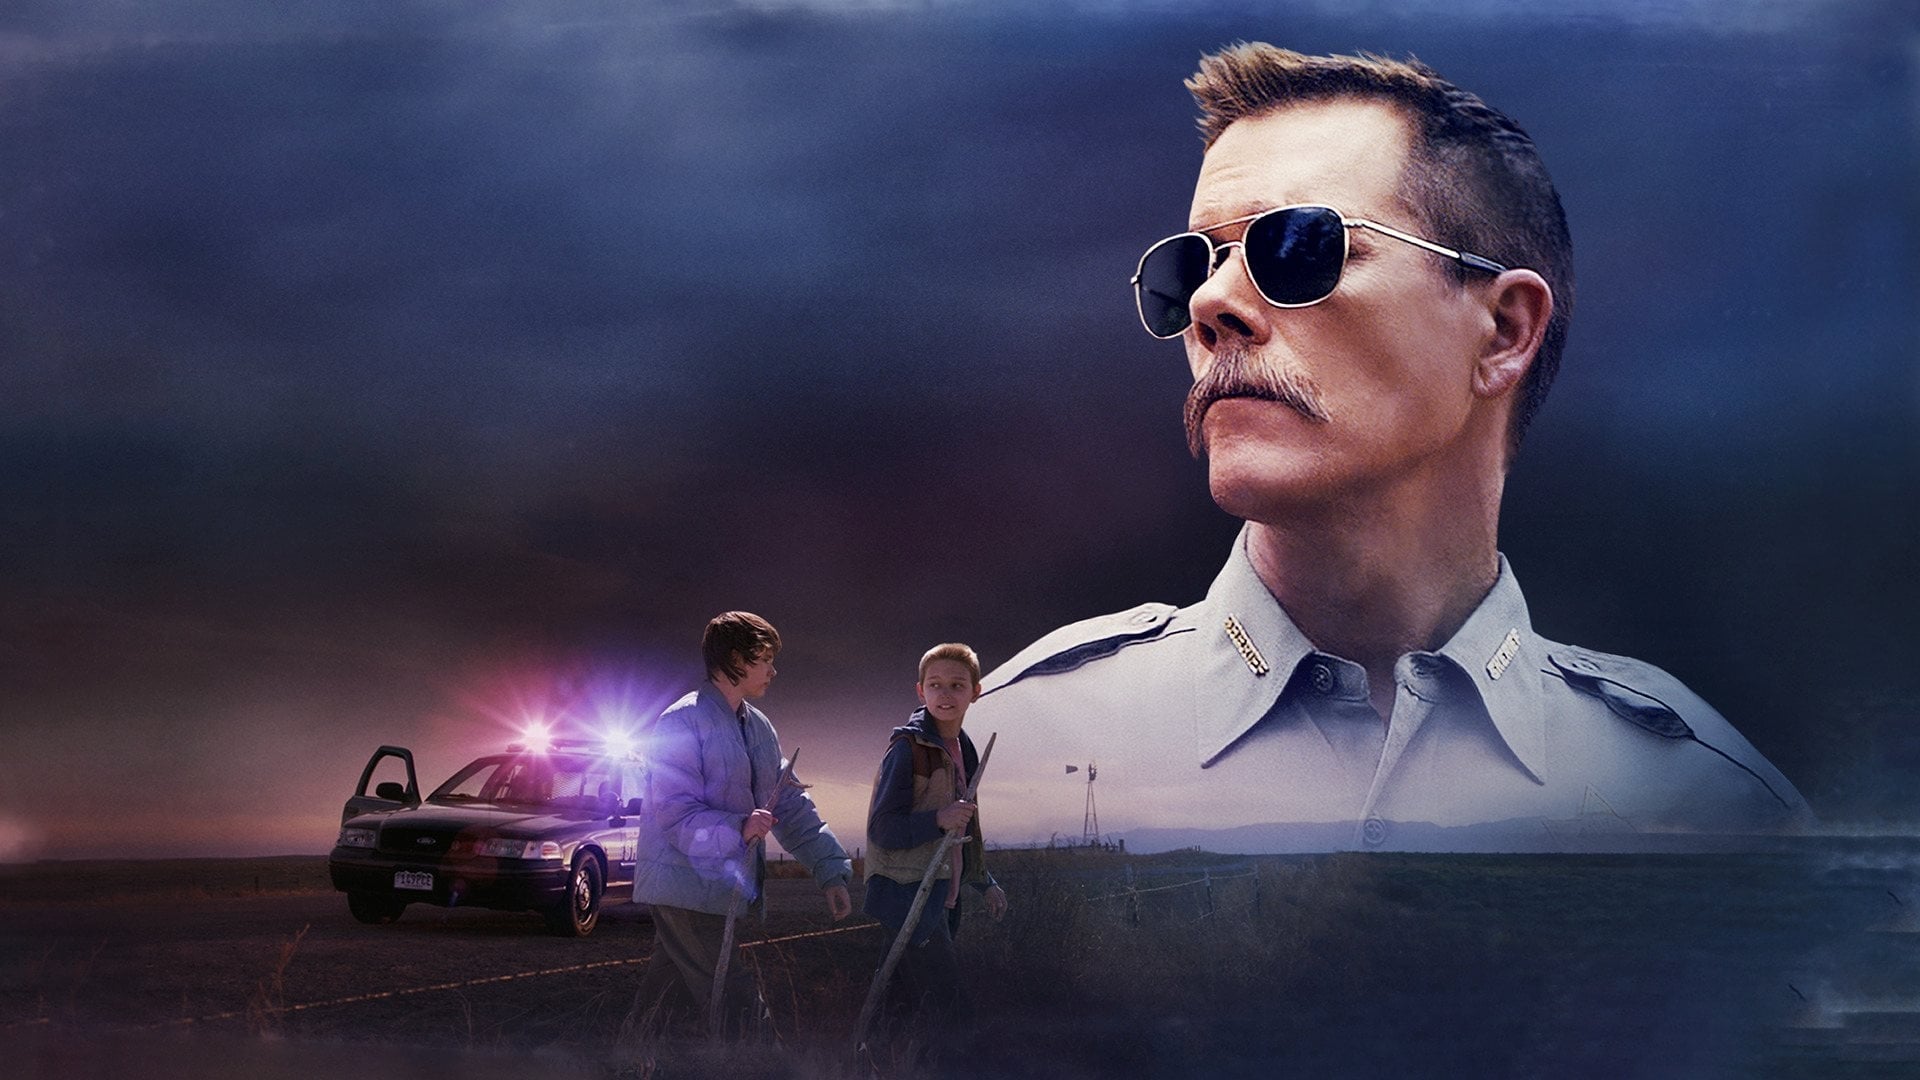 Cop Car Soundtrack Music - Complete Song List | Tunefind